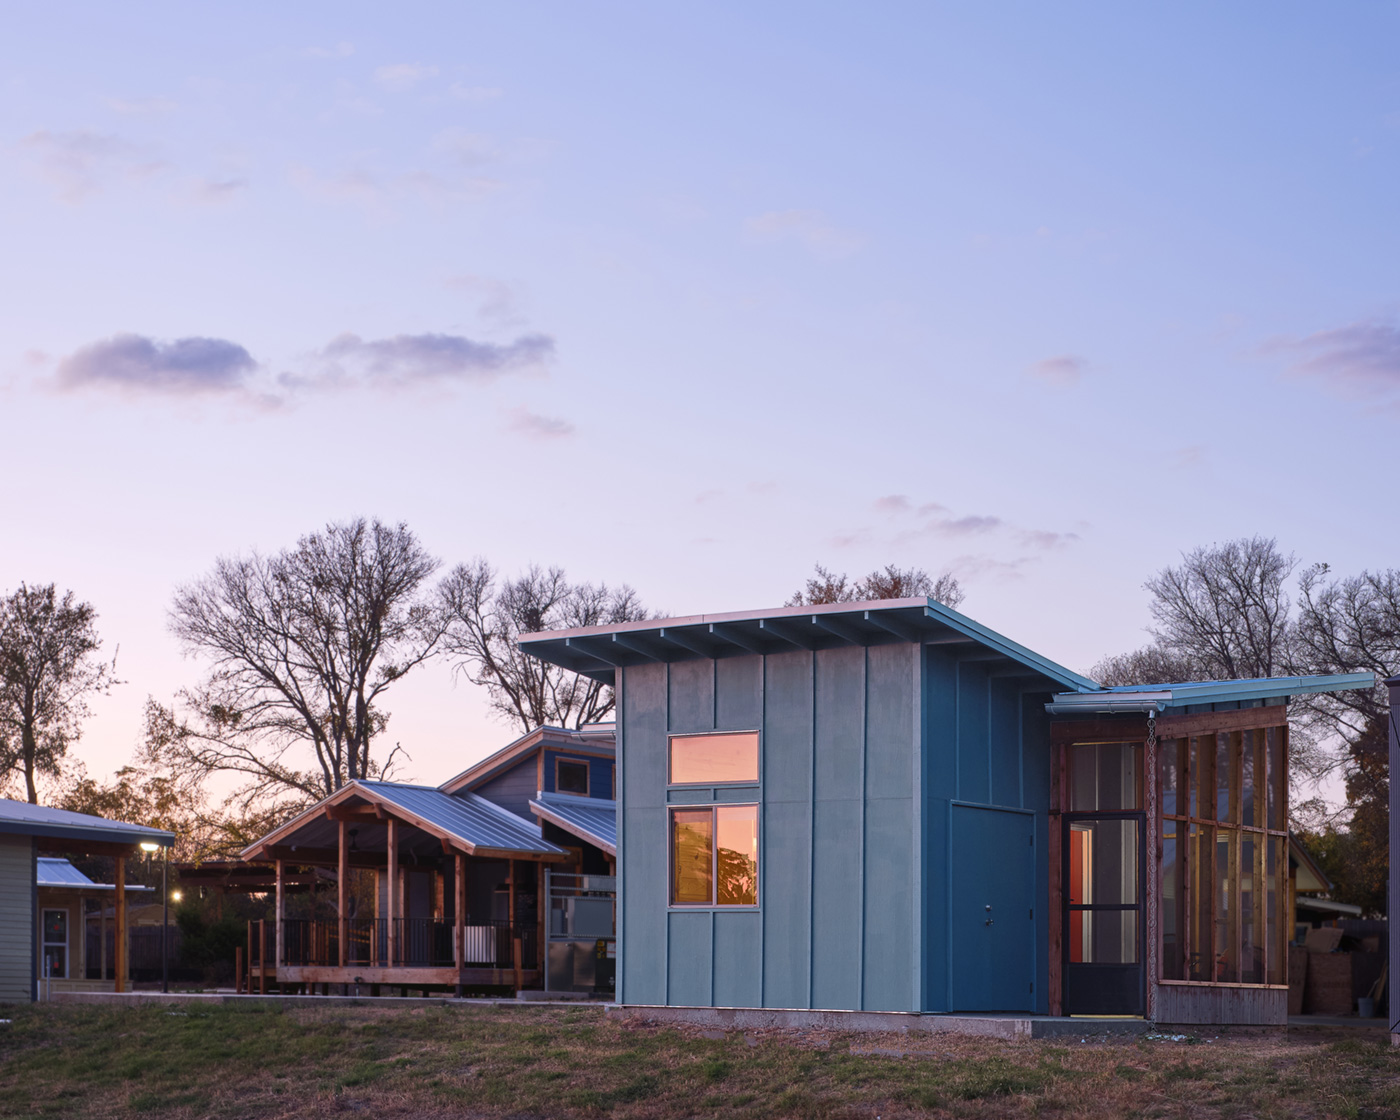 The exterior of a tiny home at dusk.